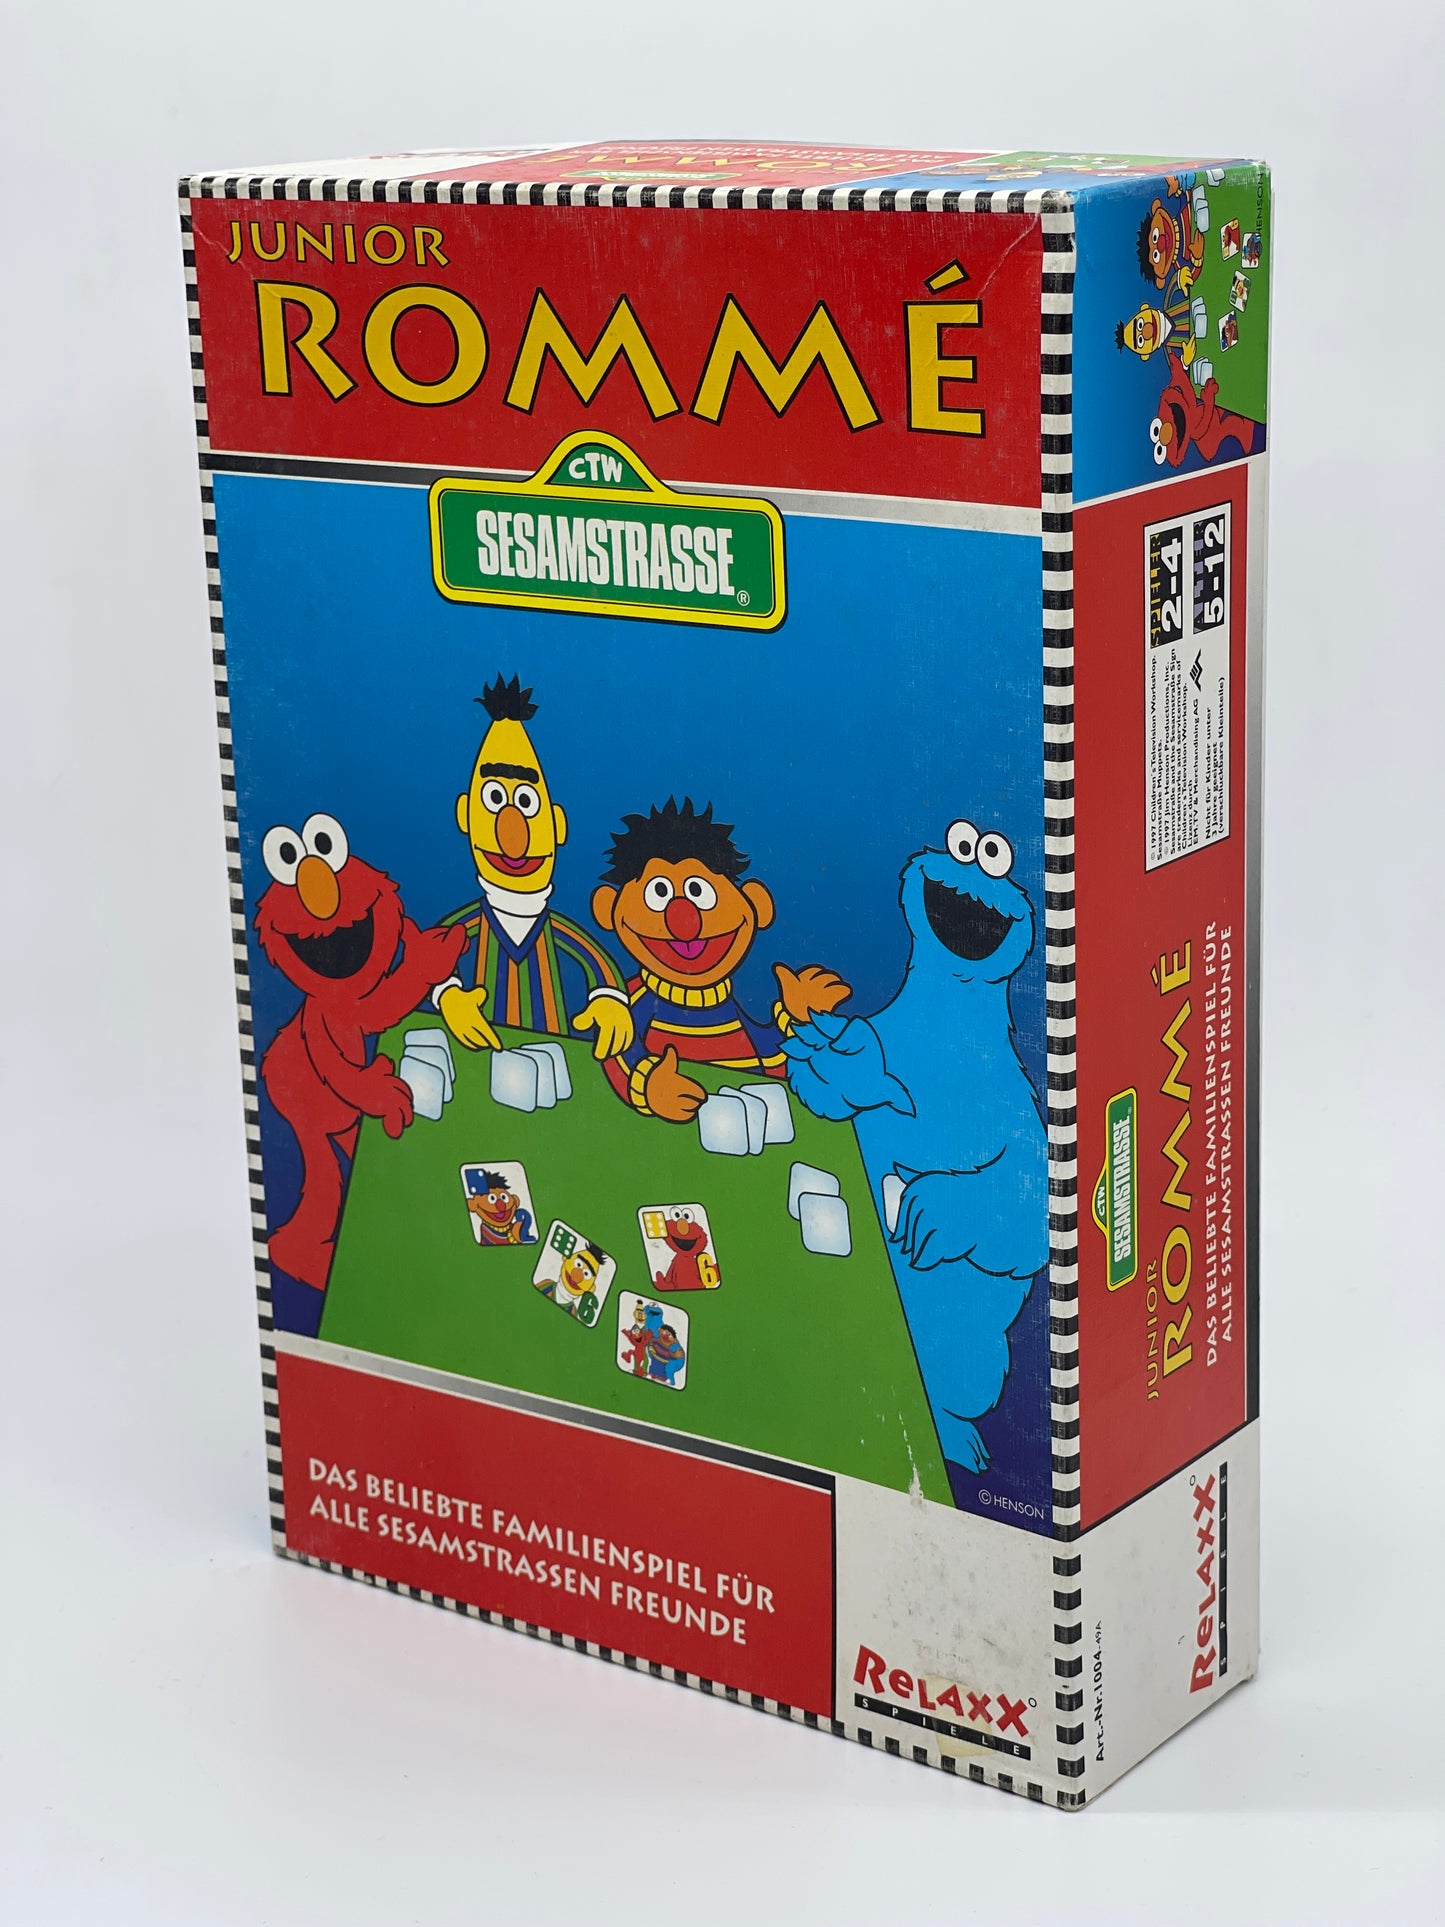 Sesame Street "Junior Rummy" Family Game Relaxx Games Vintage (1997)